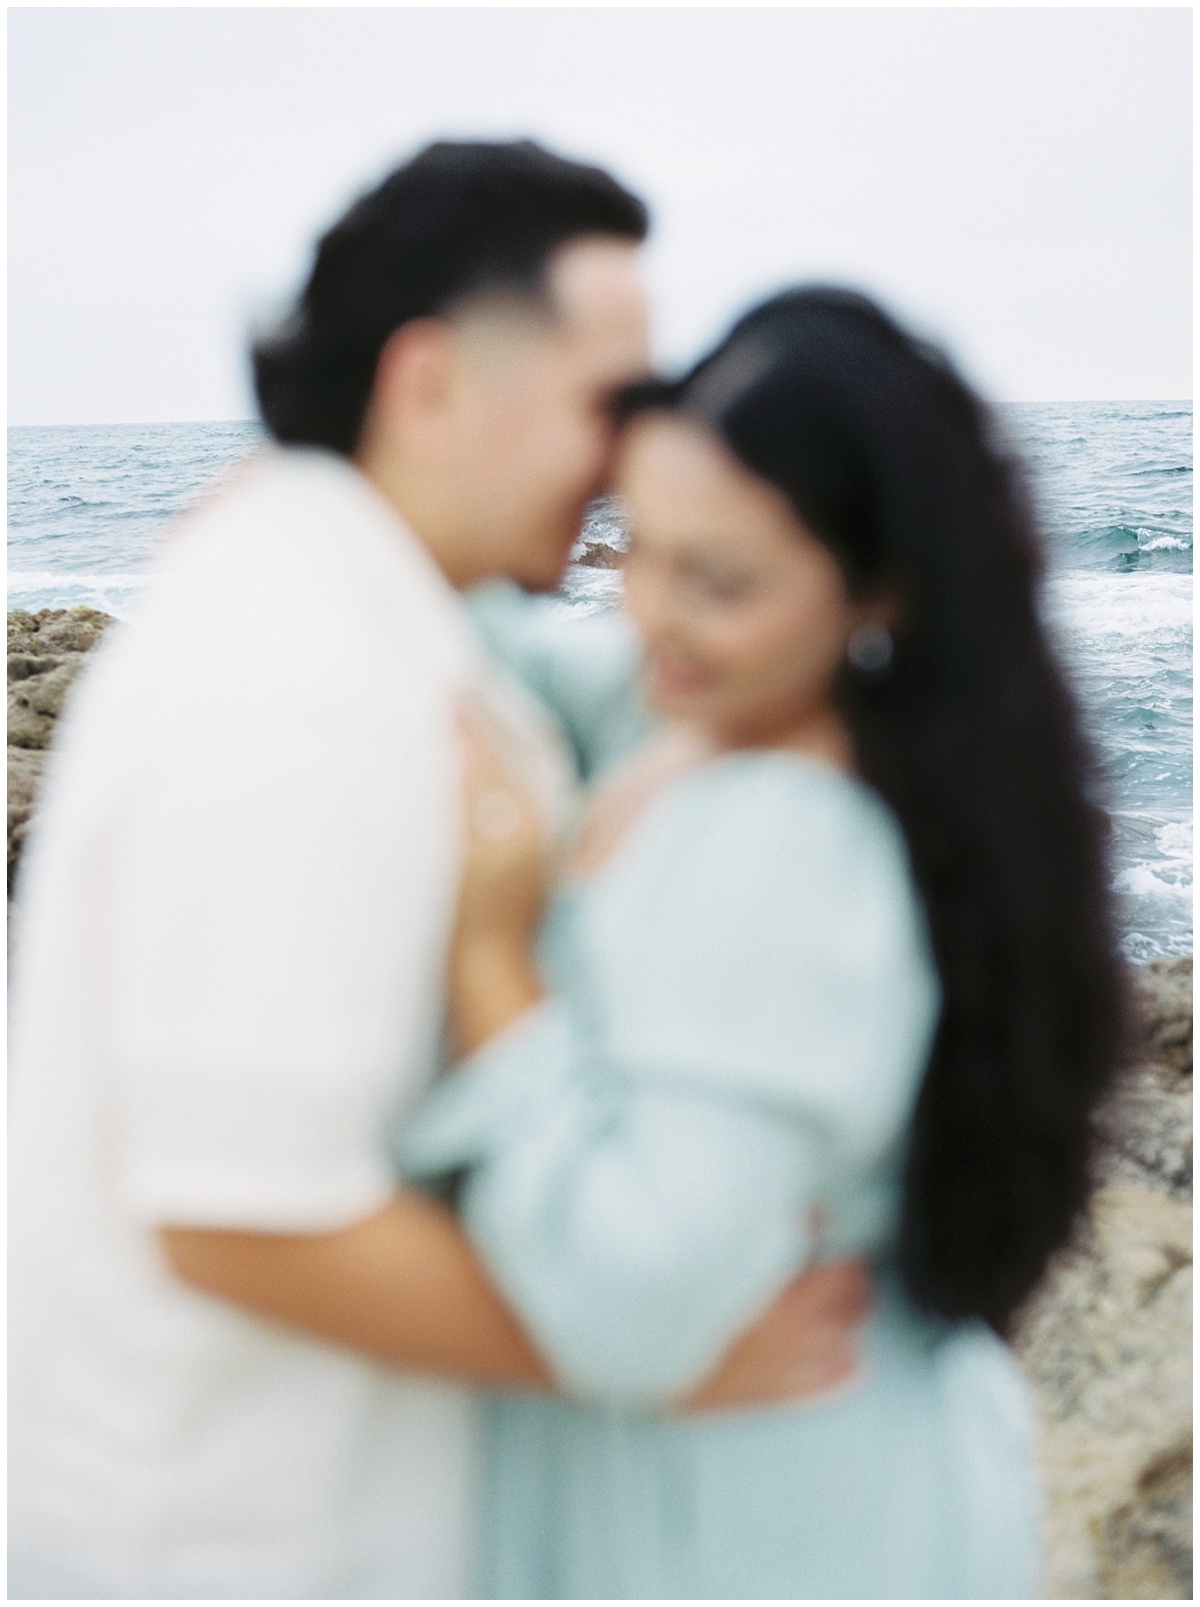 Blurry out of focus documentary style engagement photos at the beach in California.